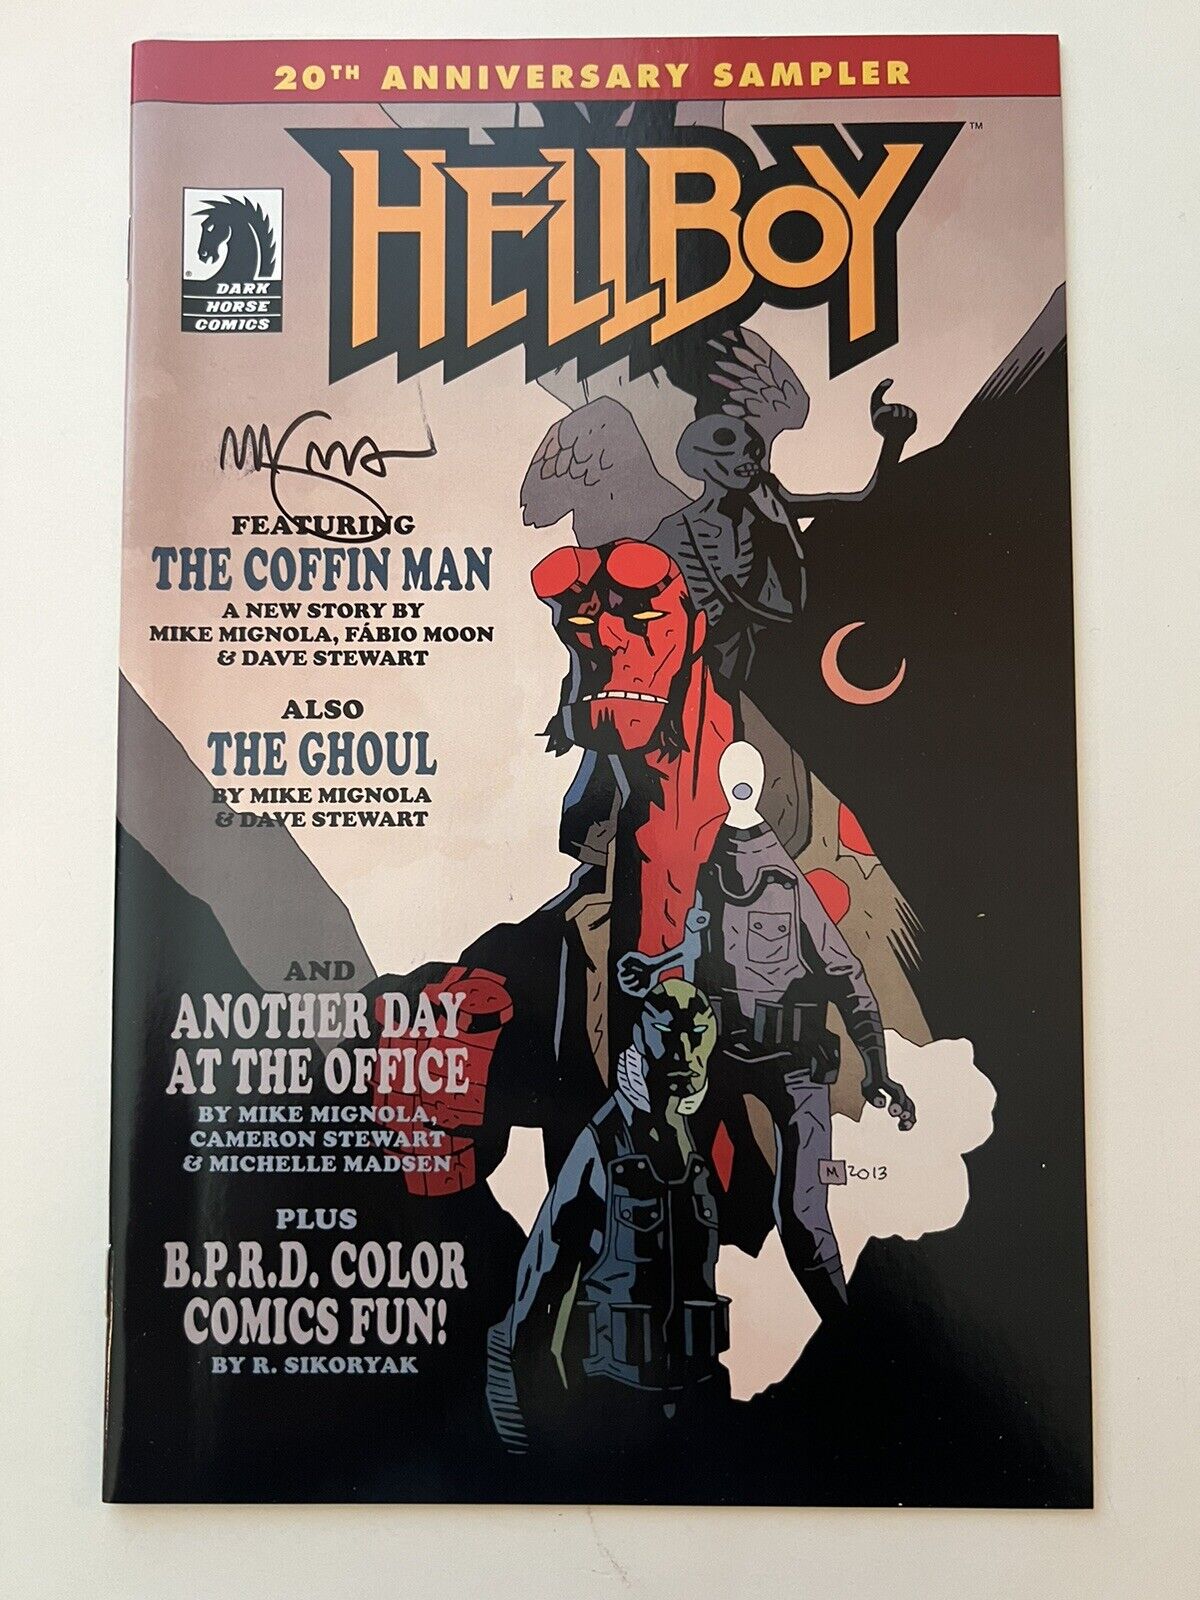 HELLBOY (2014) #1 20TH ANNIVERSARY SAMPLER SIGNED BY MIKE MIGNOLA DARK HORSE NM